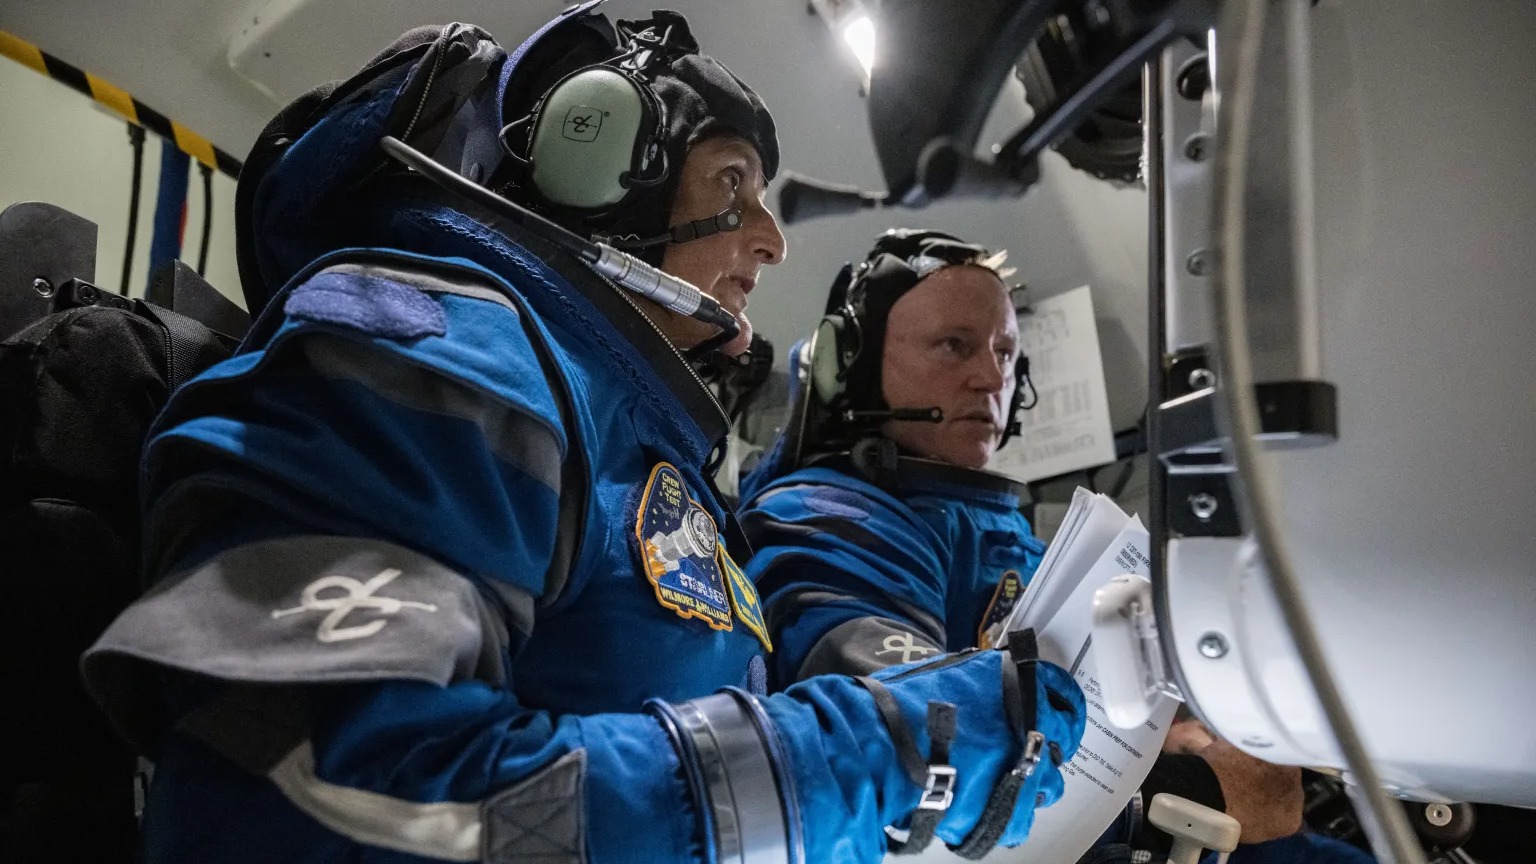 Two astronauts wearing space suits look at screens in a simulator